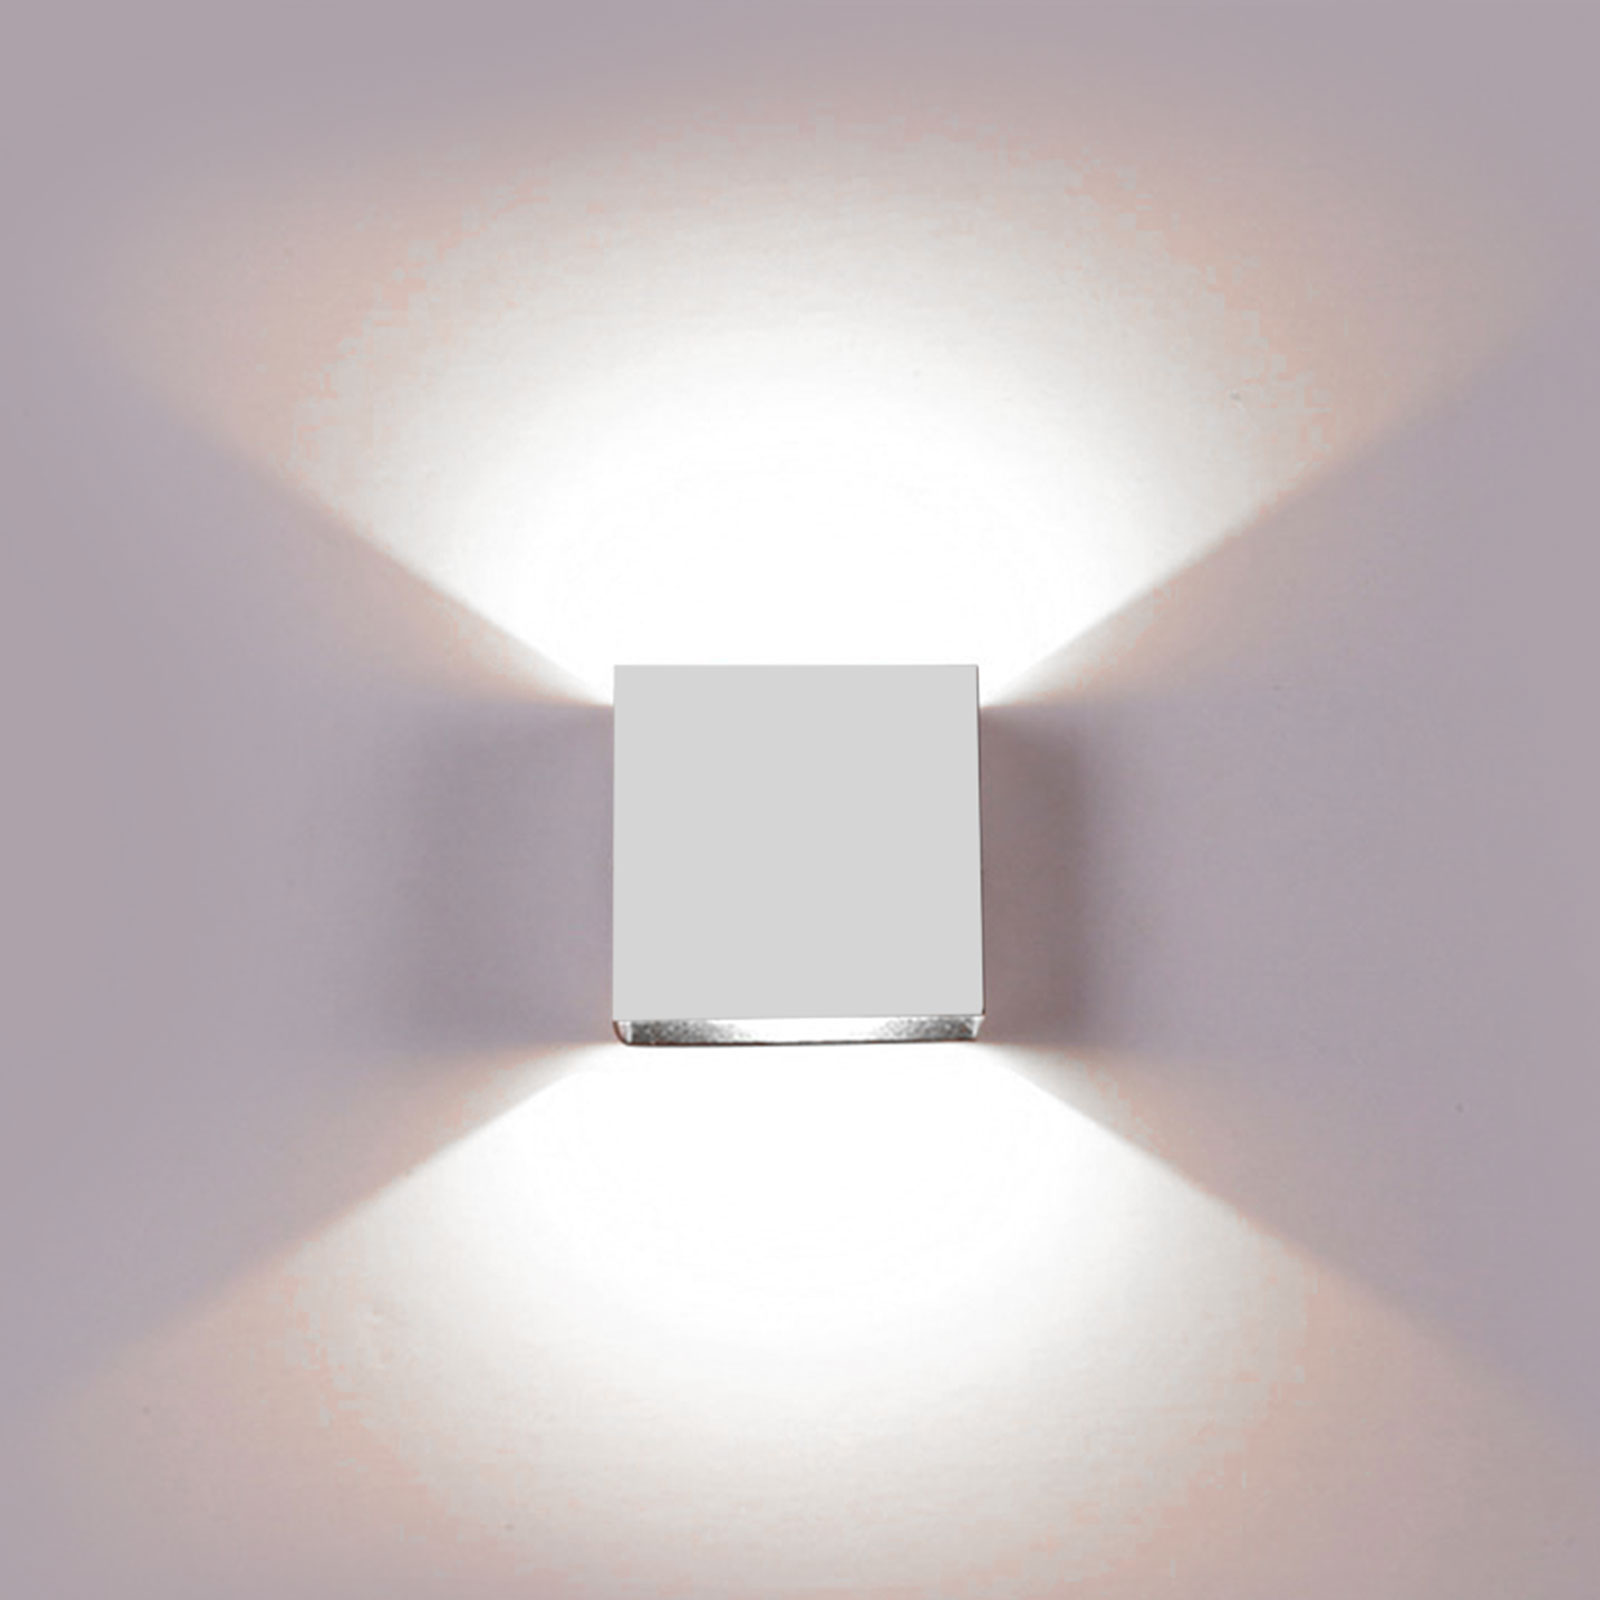 Led Wall Light Up Down Cube Indoor Outdoor Sconce Lighting Lamp Fixture Decor 